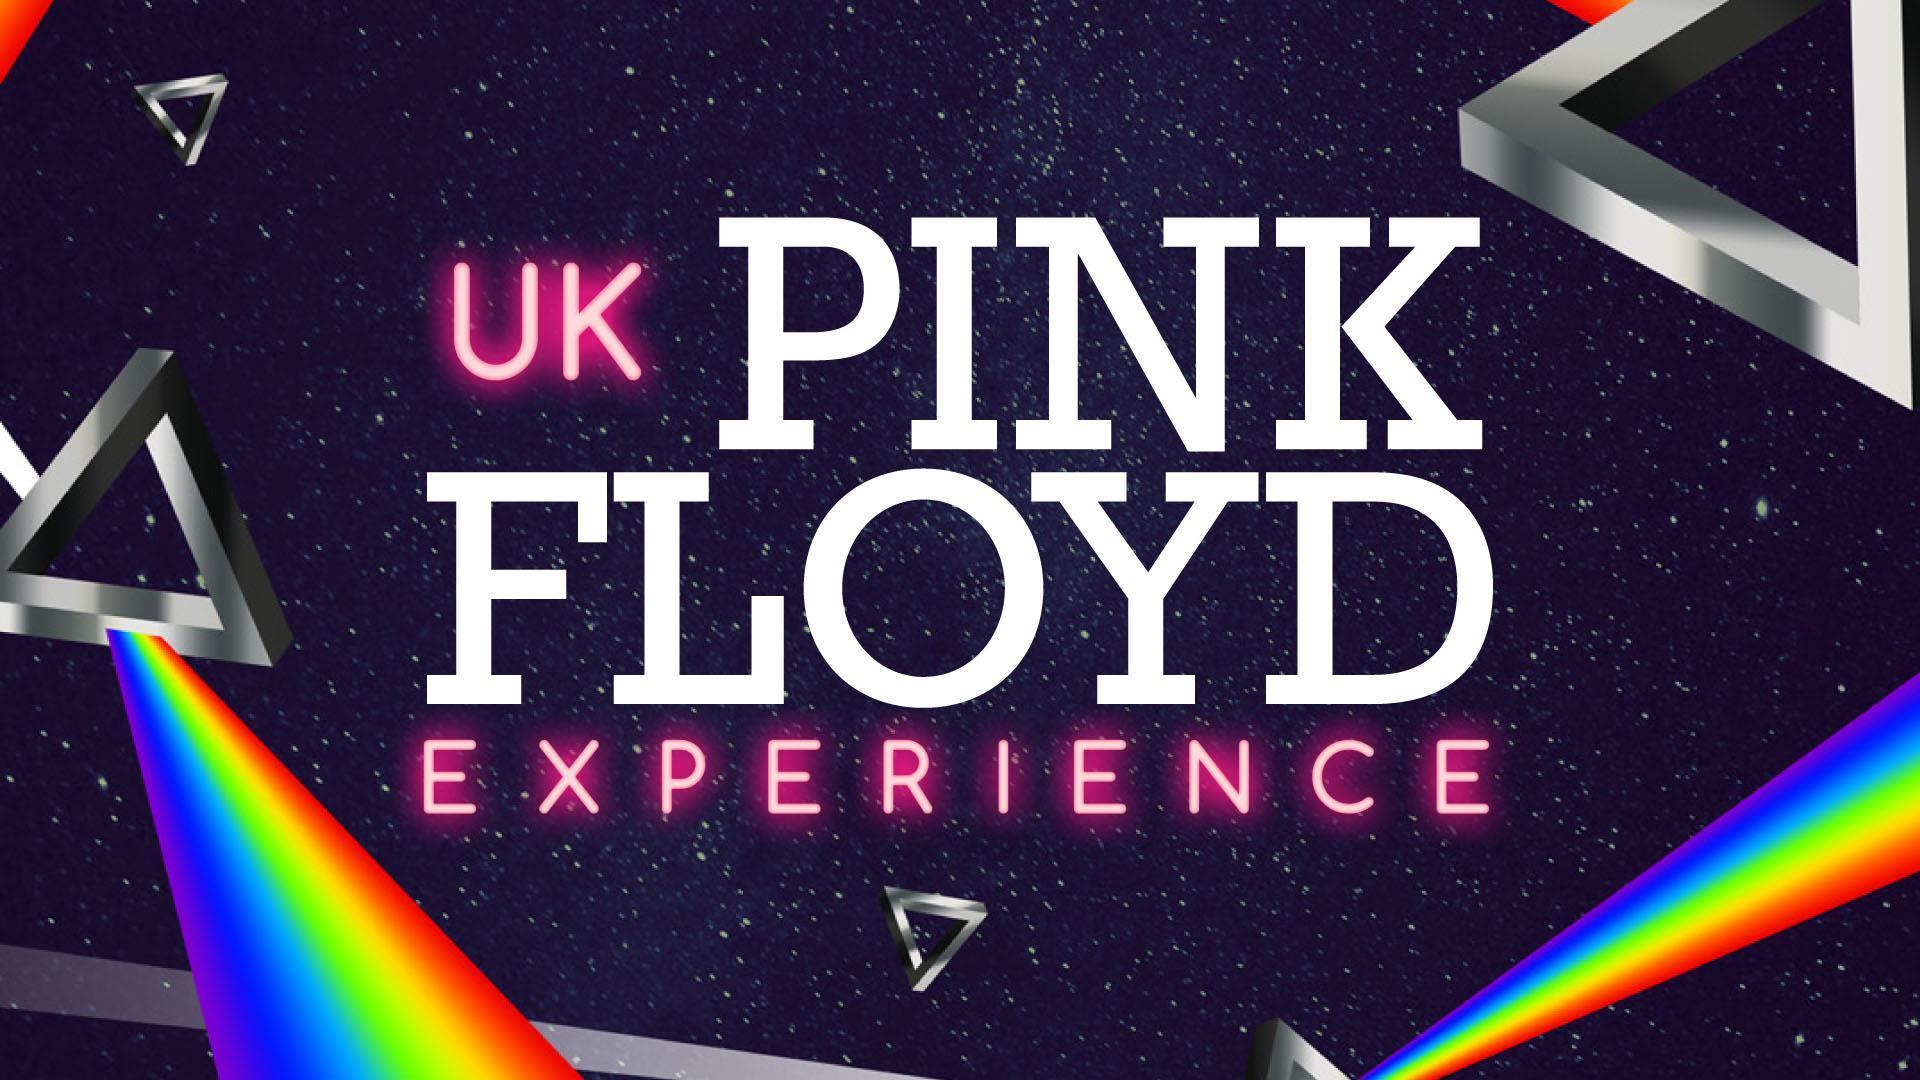 The UK Pink Floyd Experience 